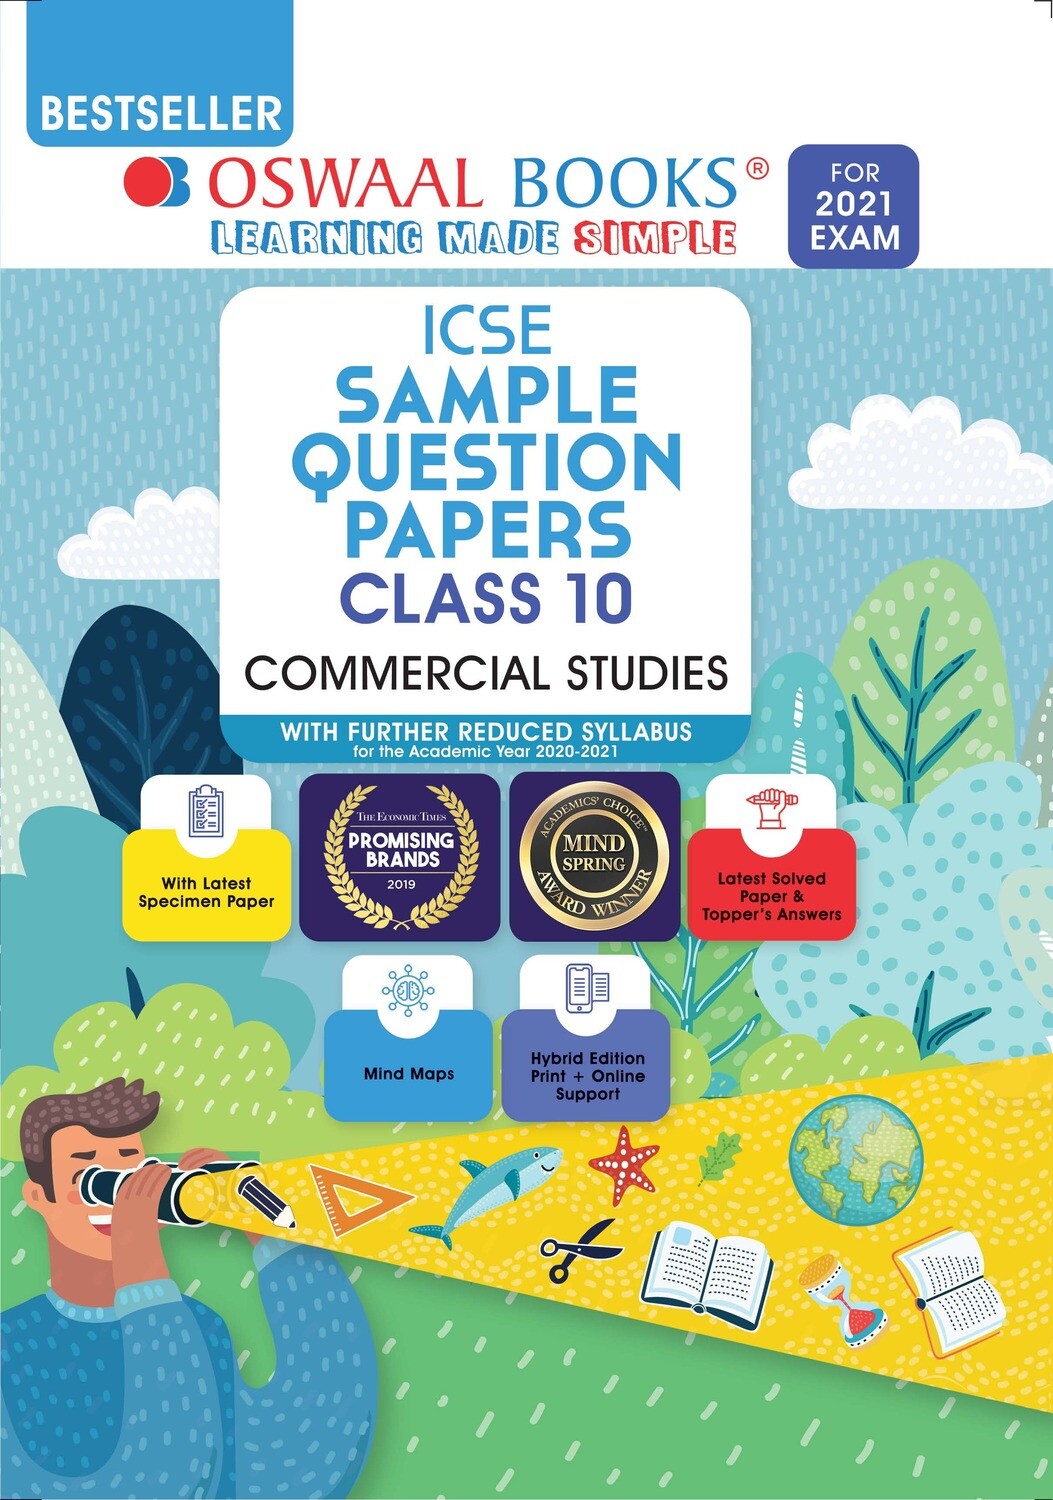 Buy e-book: Oswaal ICSE Sample Question Papers Class 10 Commercial Studies (Reduced Syllabus for 2021 Exam)